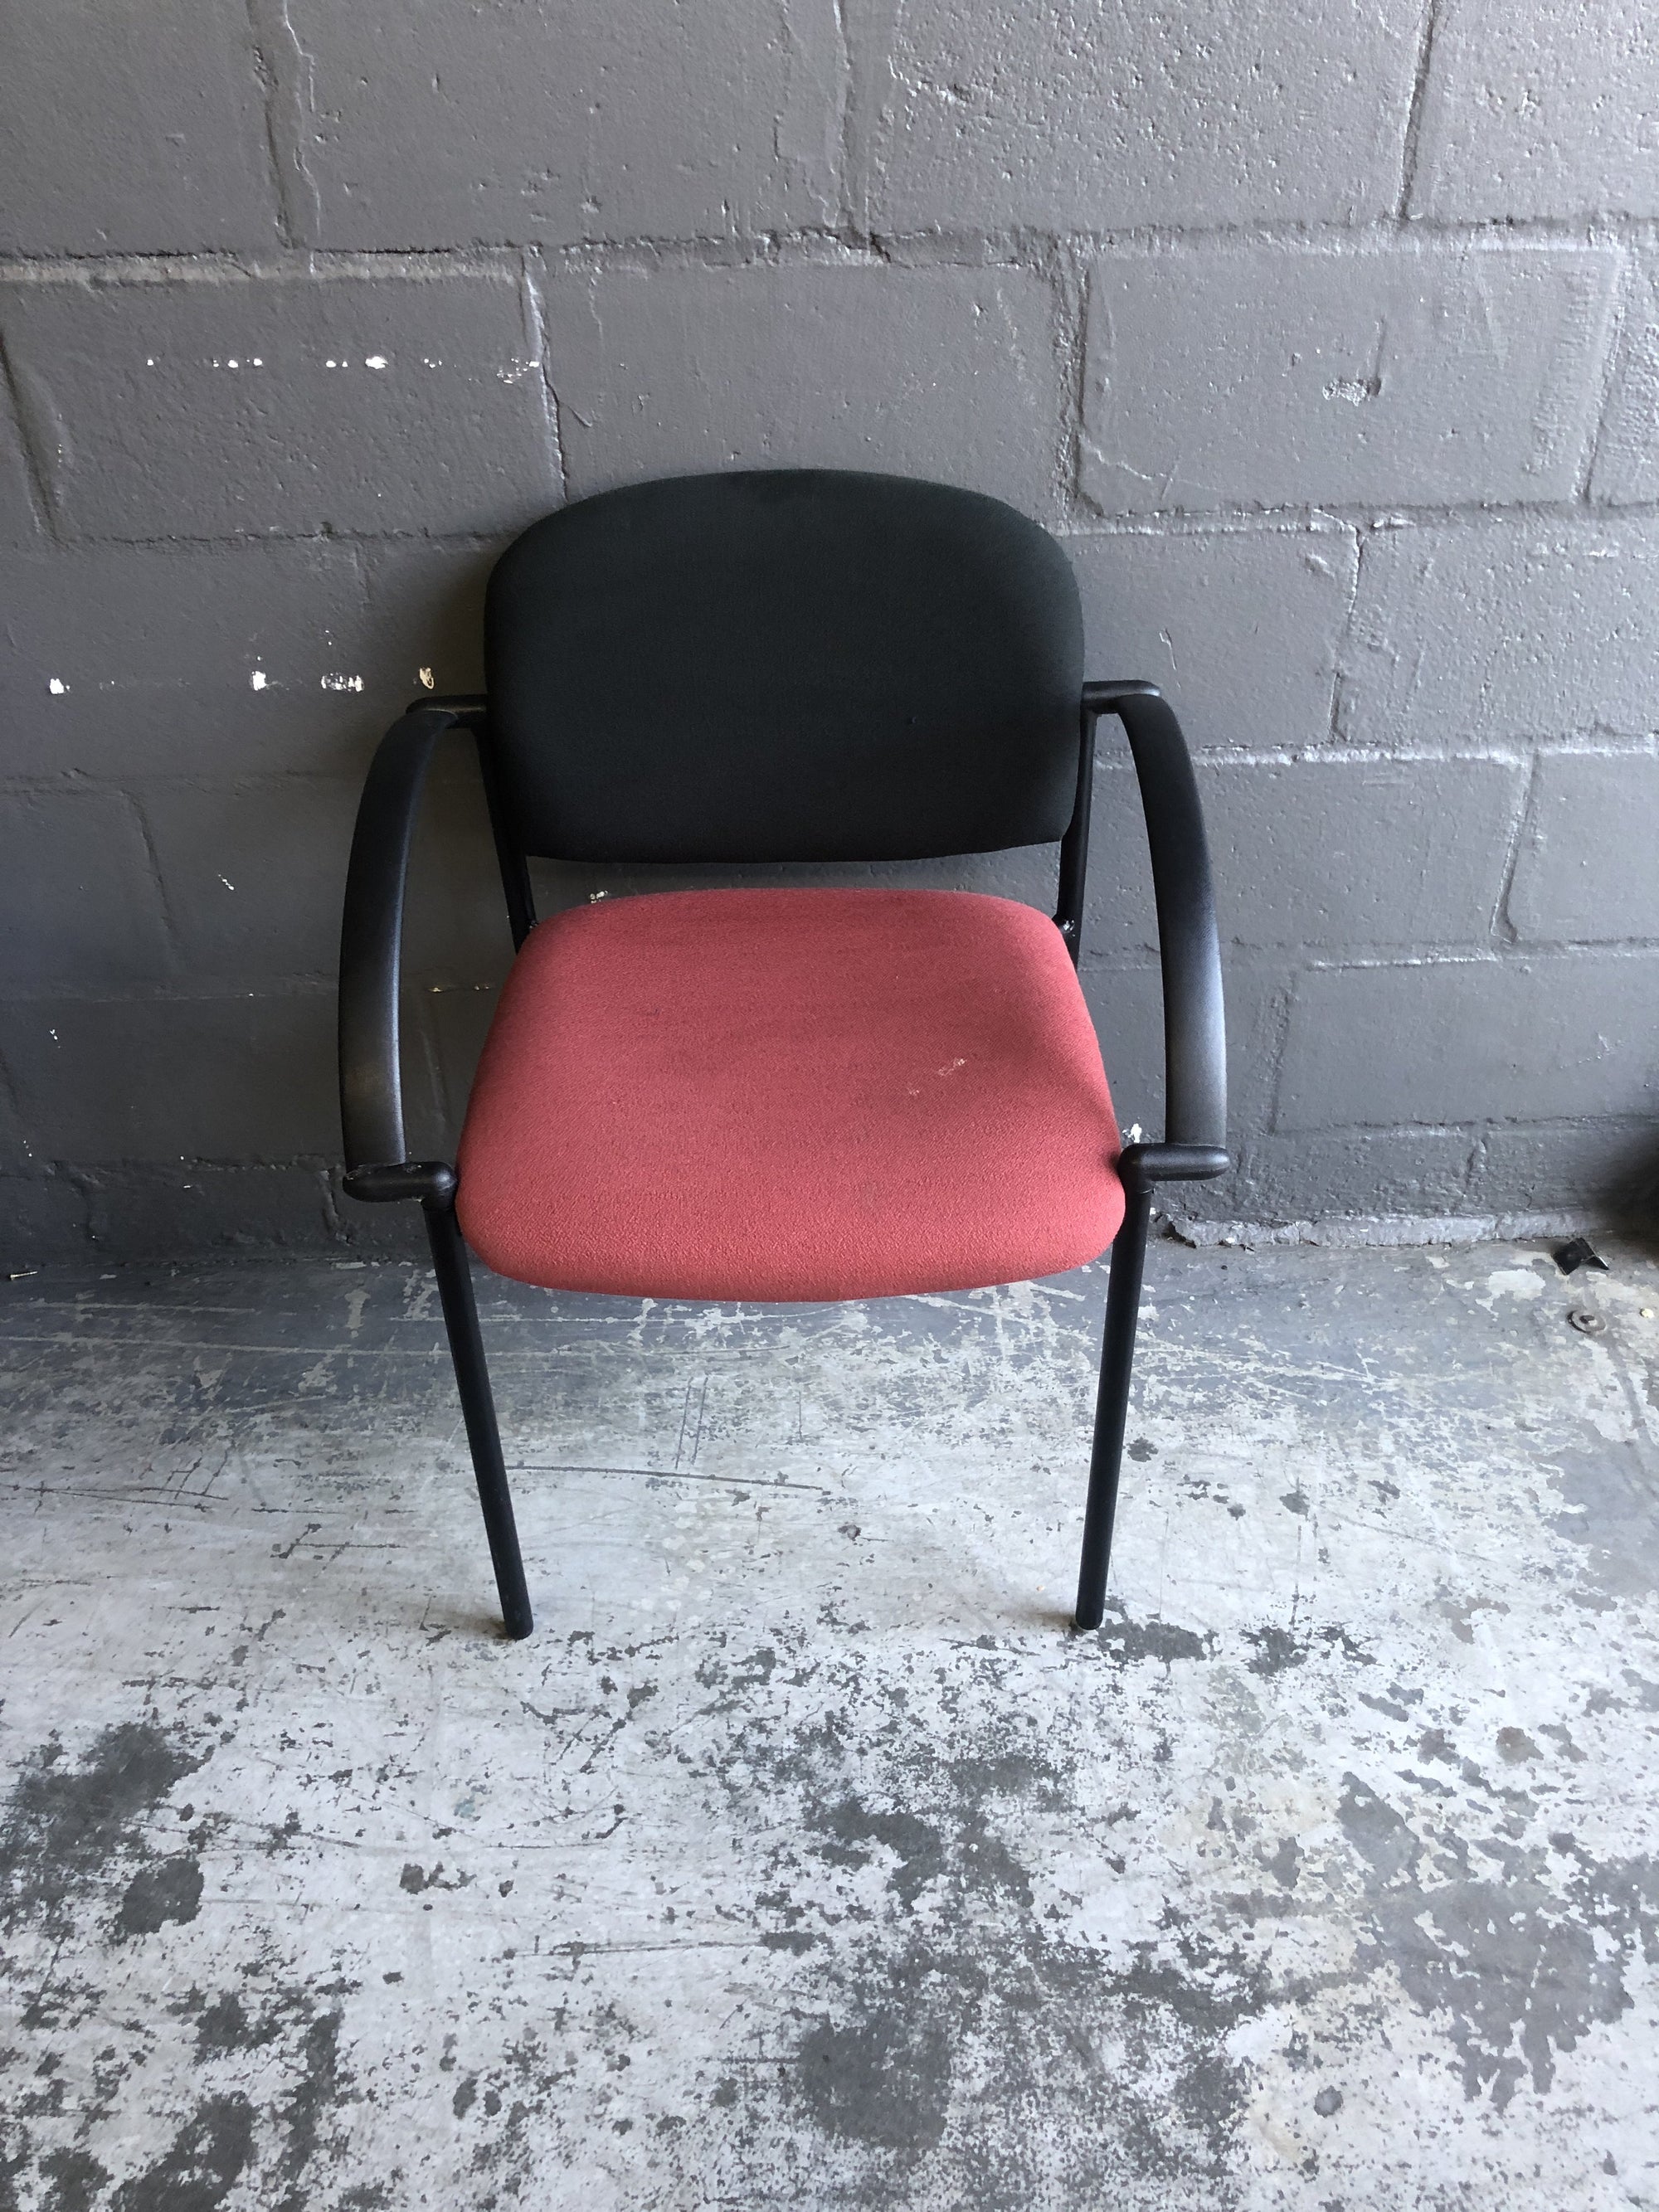 Black and Red Visitors Chair - 2ndhandwarehouse.com